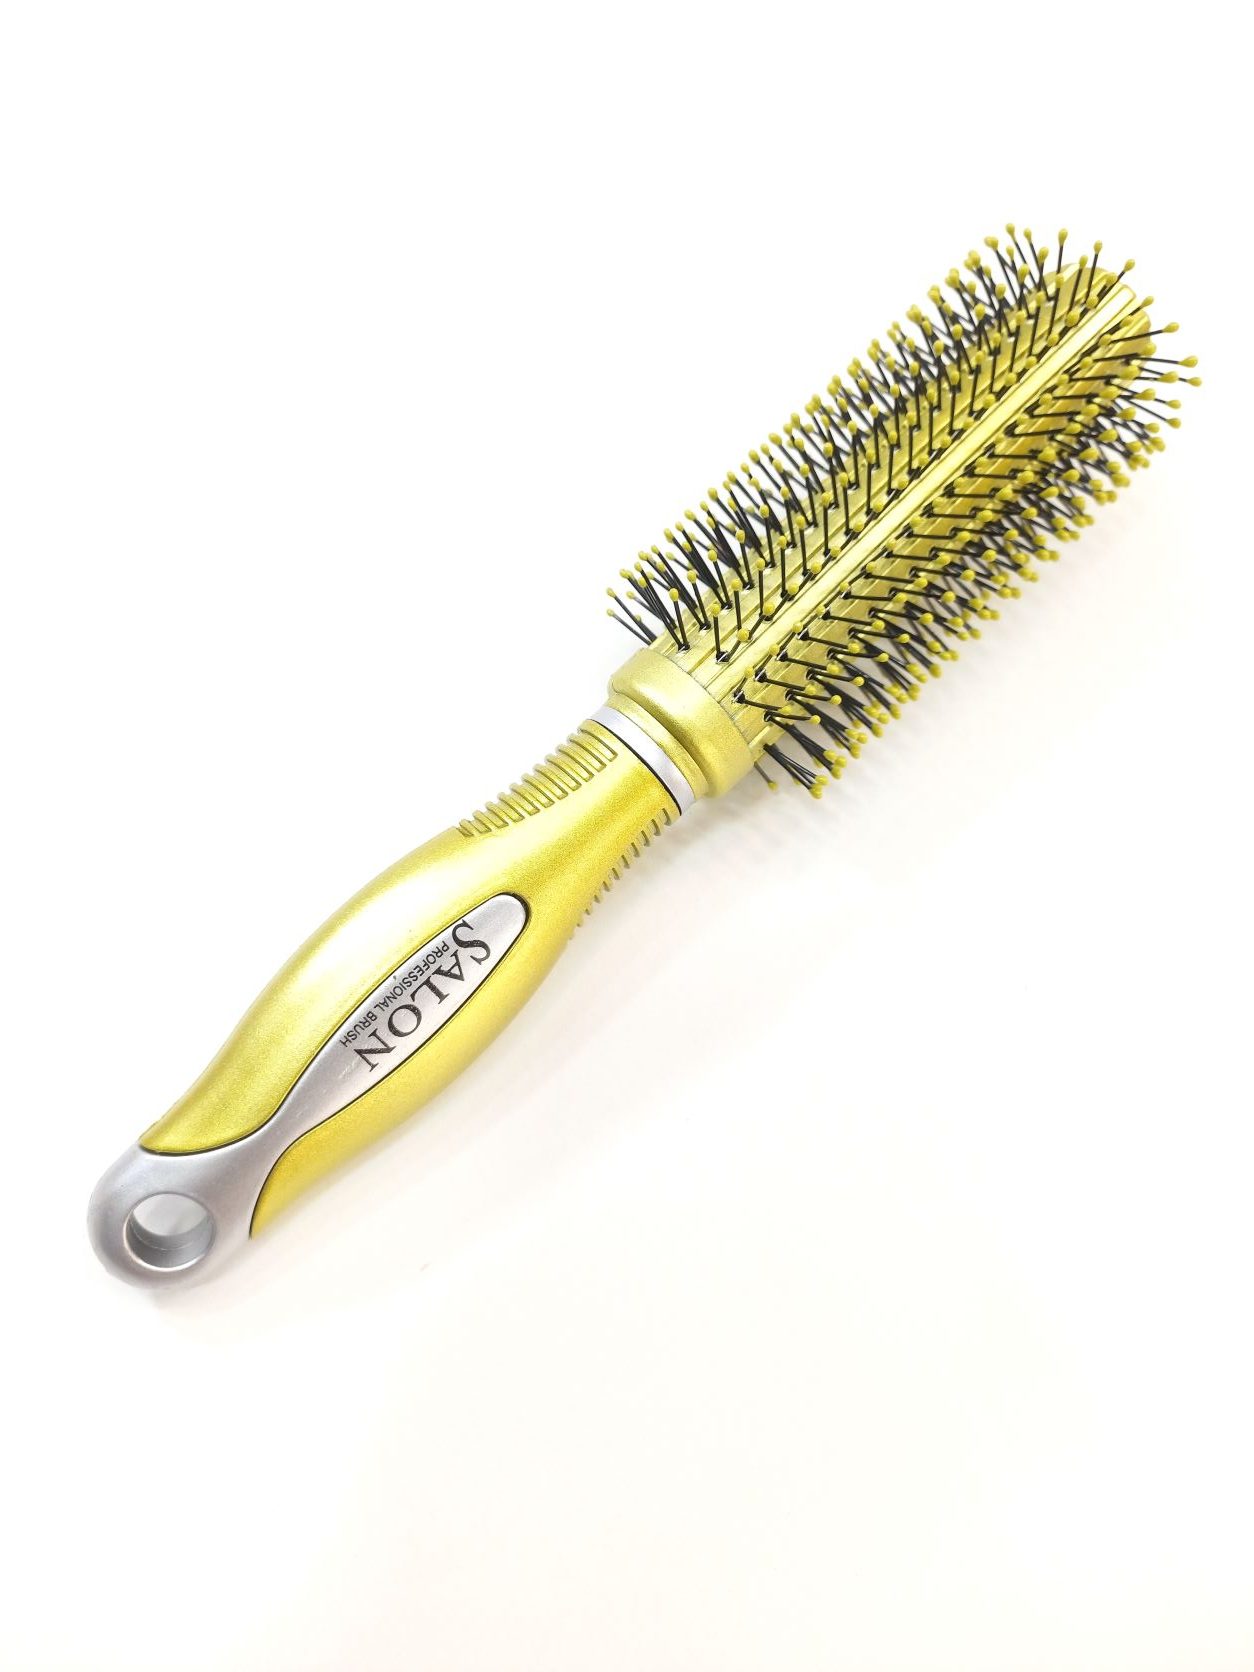 Round Hair Brush with Nylon Bristles For Blow Drying | Hair Styling |  Curling | For Men & Women – Plastic  | ShopHere